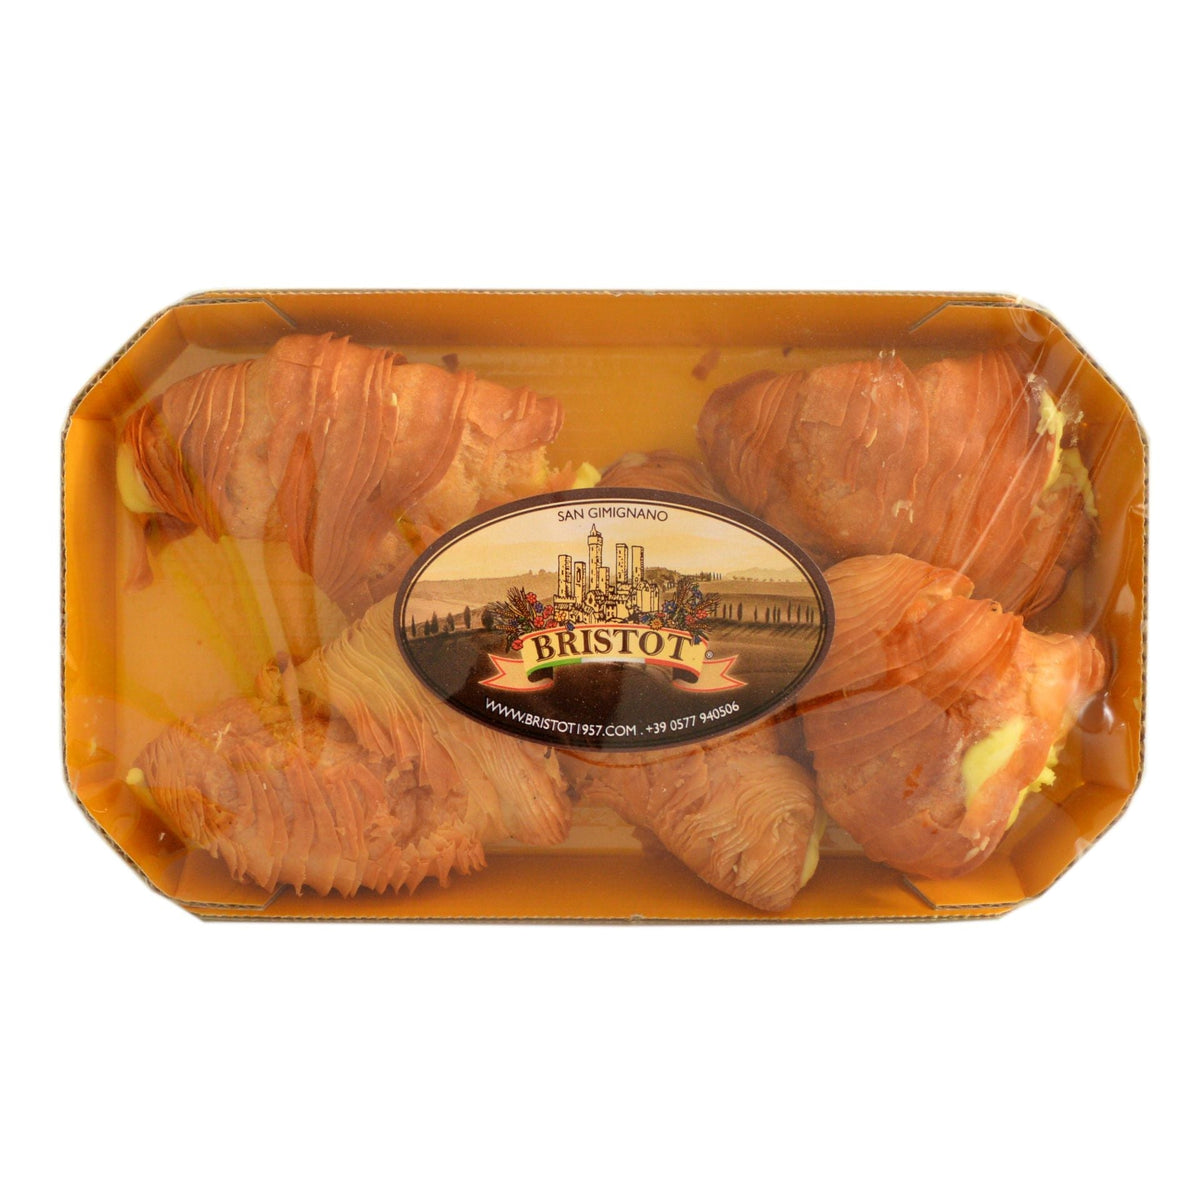 Bristot Lemon Cream Aragostine 180g  | Imported and distributed in the UK by Just Gourmet Foods